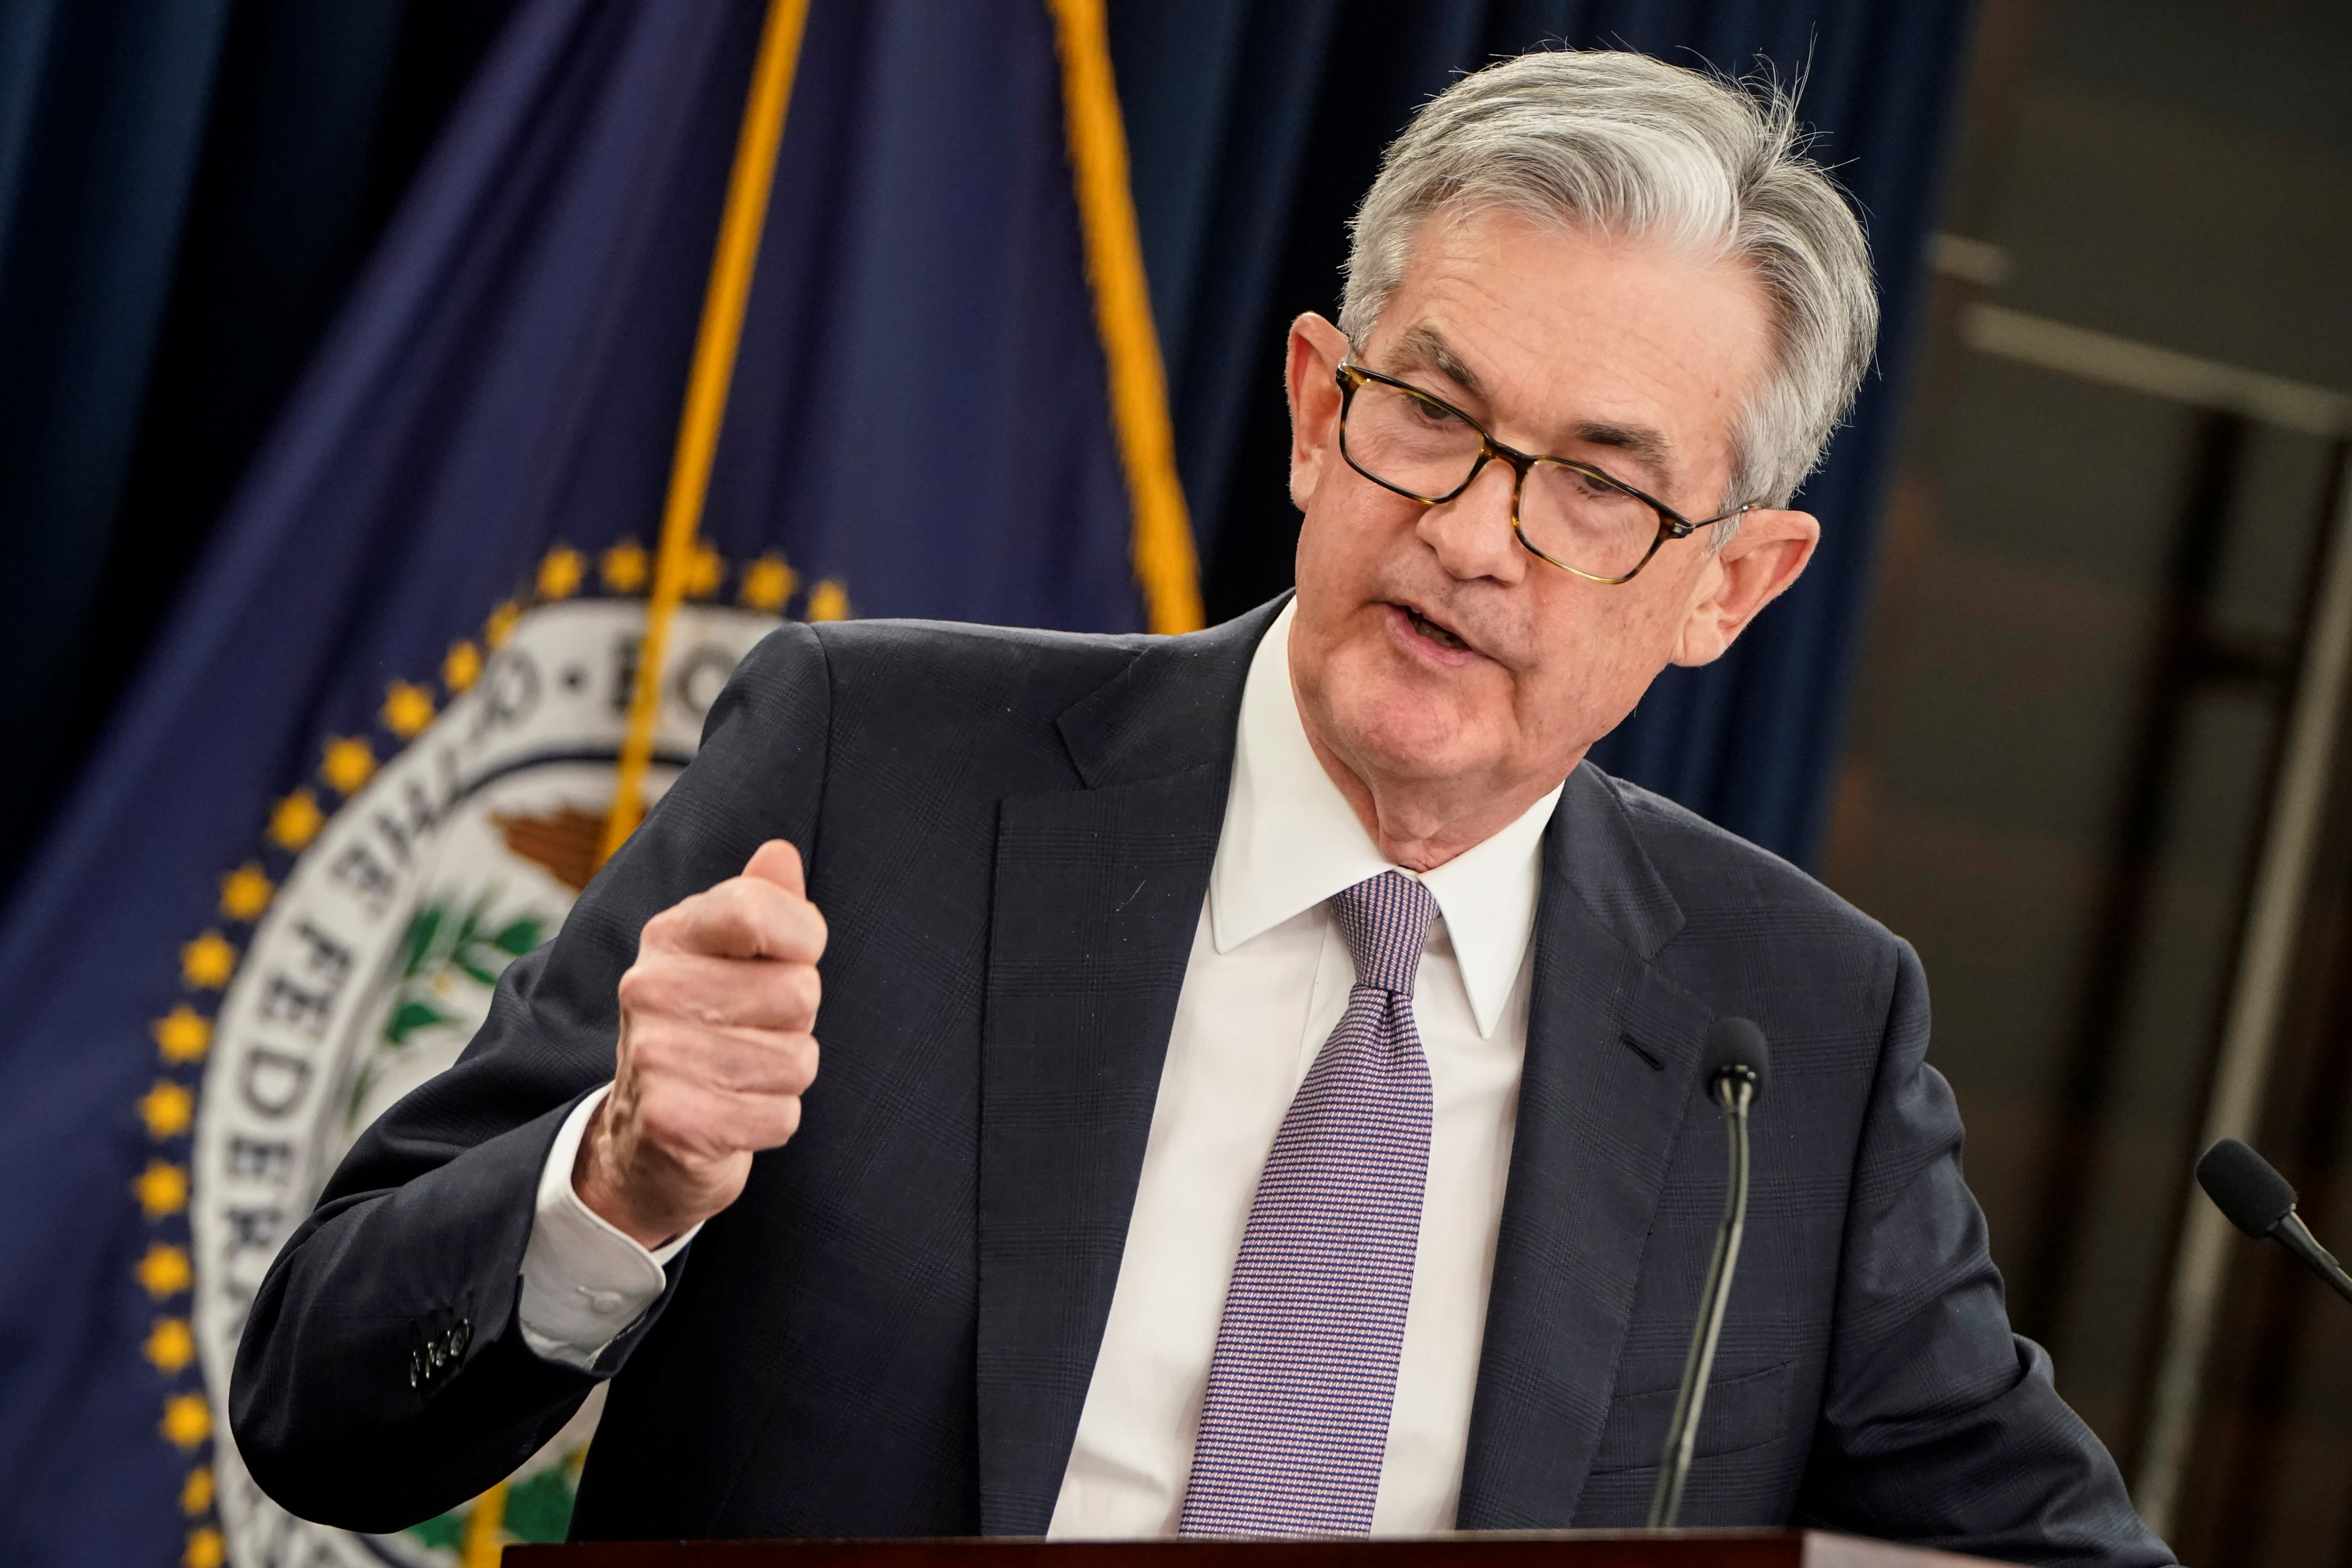 Fed cuts rates by 50 basis points amid coronavirus concerns